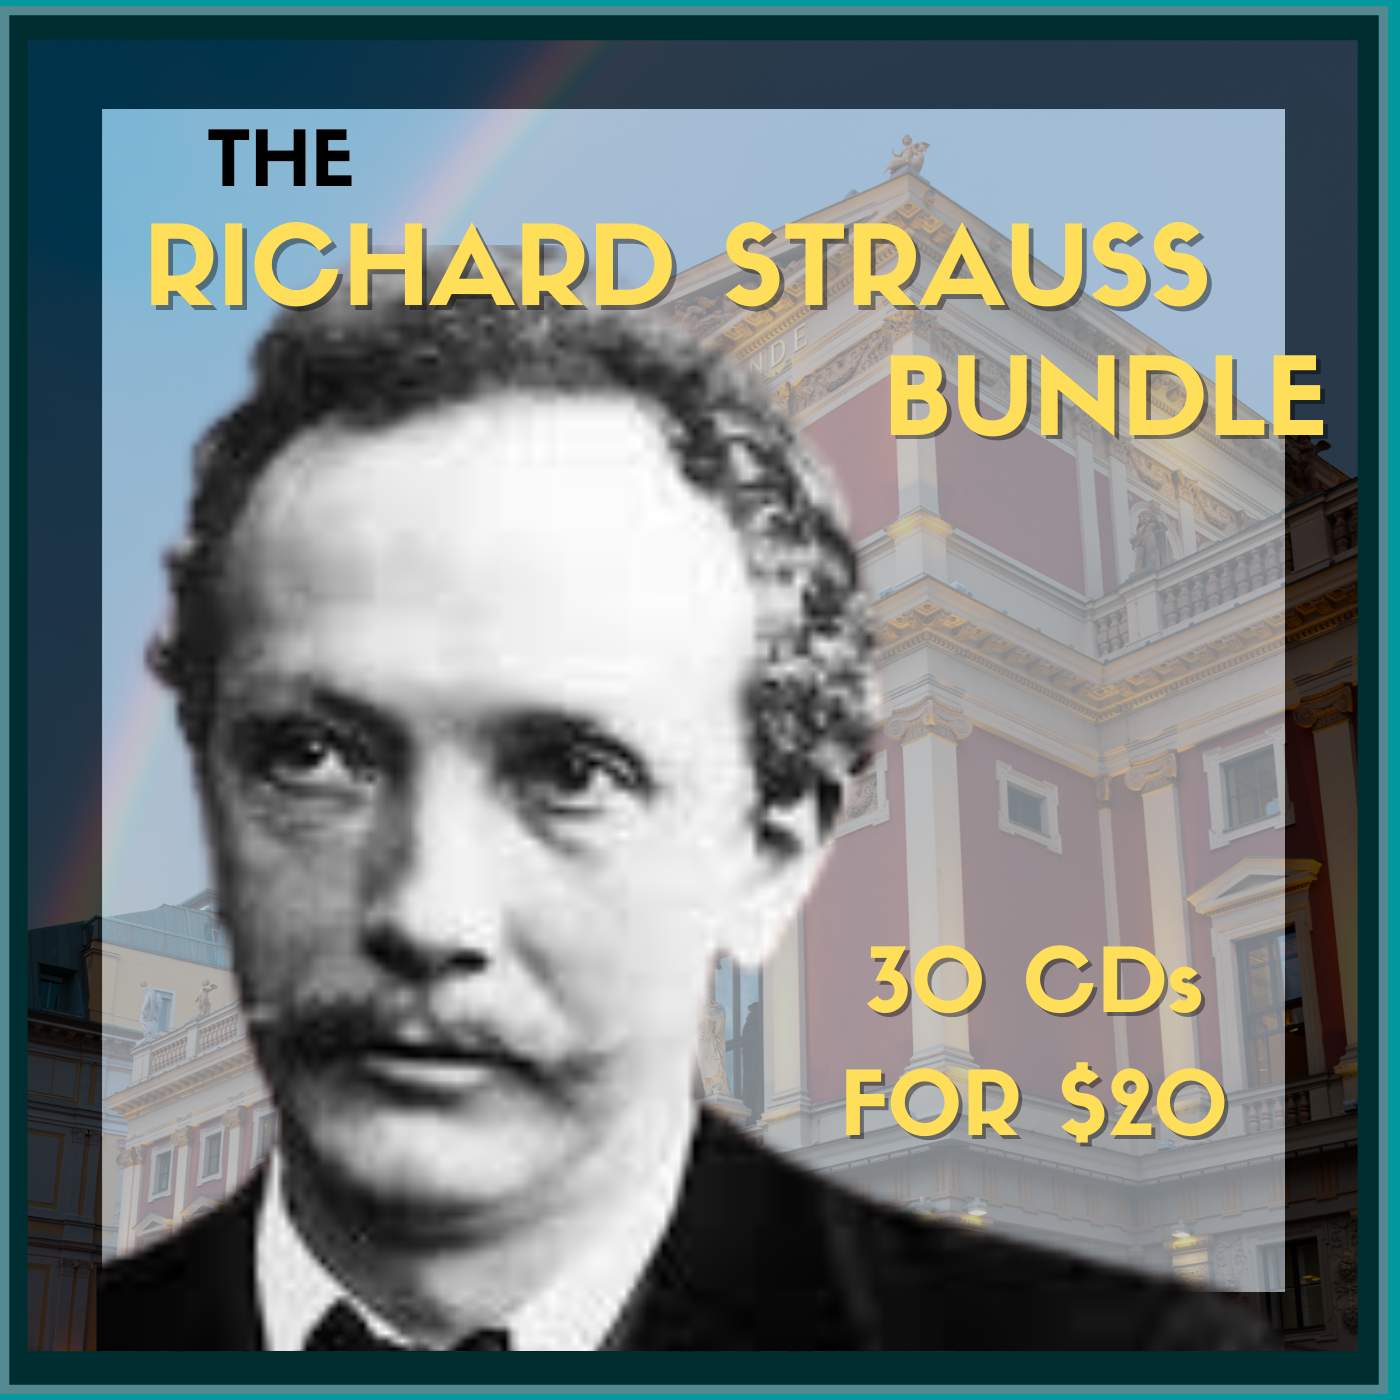 THE RICHARD STRAUSS BUNDLE (30 CDs FOR $20)